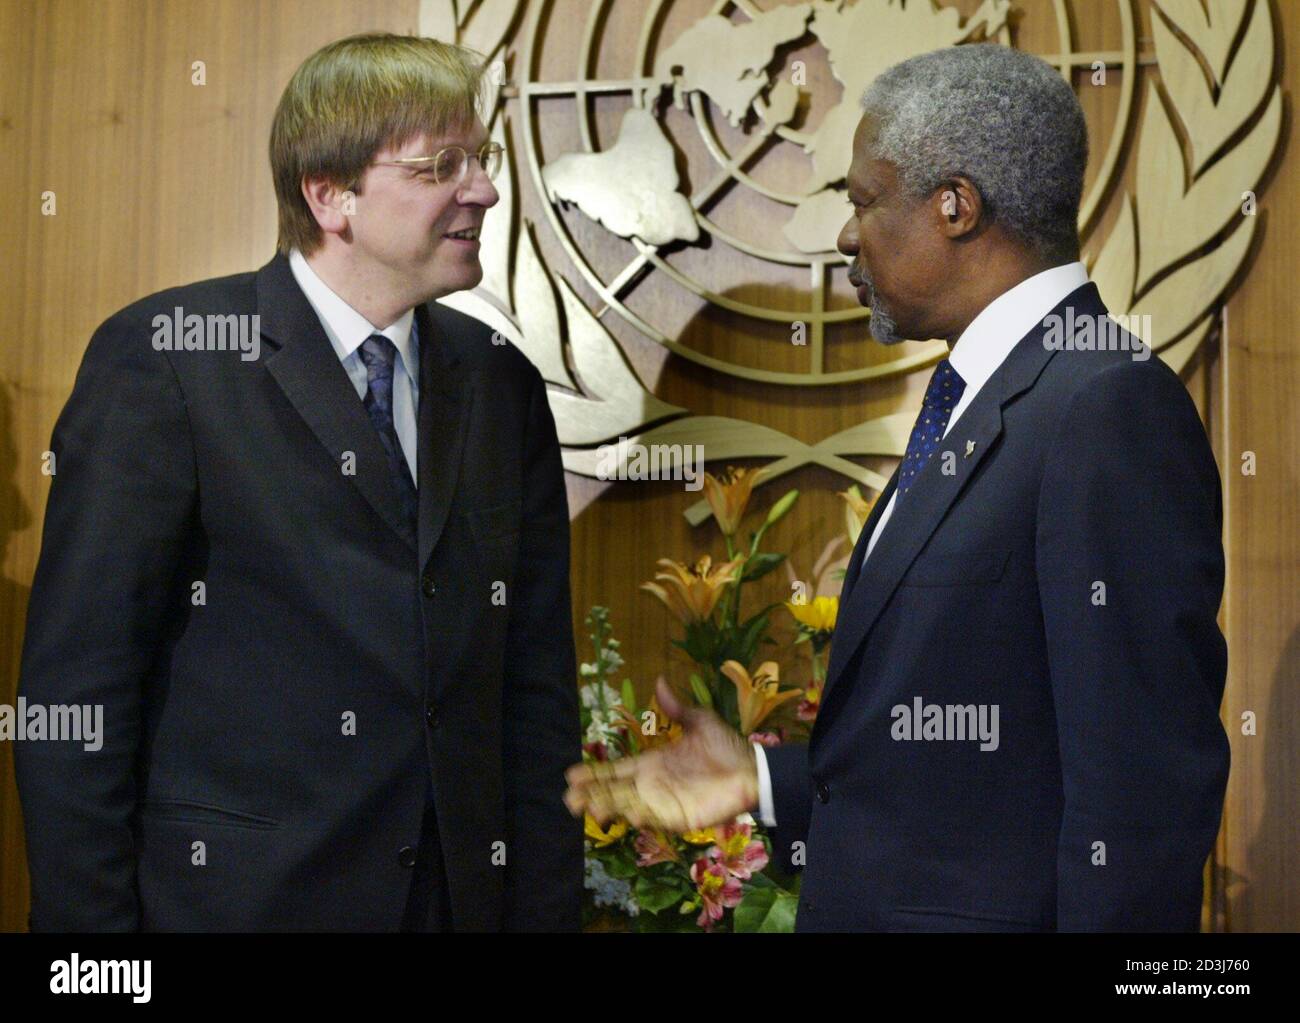 The Prime Minister of the Kingdom of Belgium, Guy Verhofstadt (L) chats with United Nations Secretary General Kofi Annan at the outset of their meeting at United Nations Headquarters in New York, February 13, 2003. REUTERS/Mike Segar  MS Stock Photo